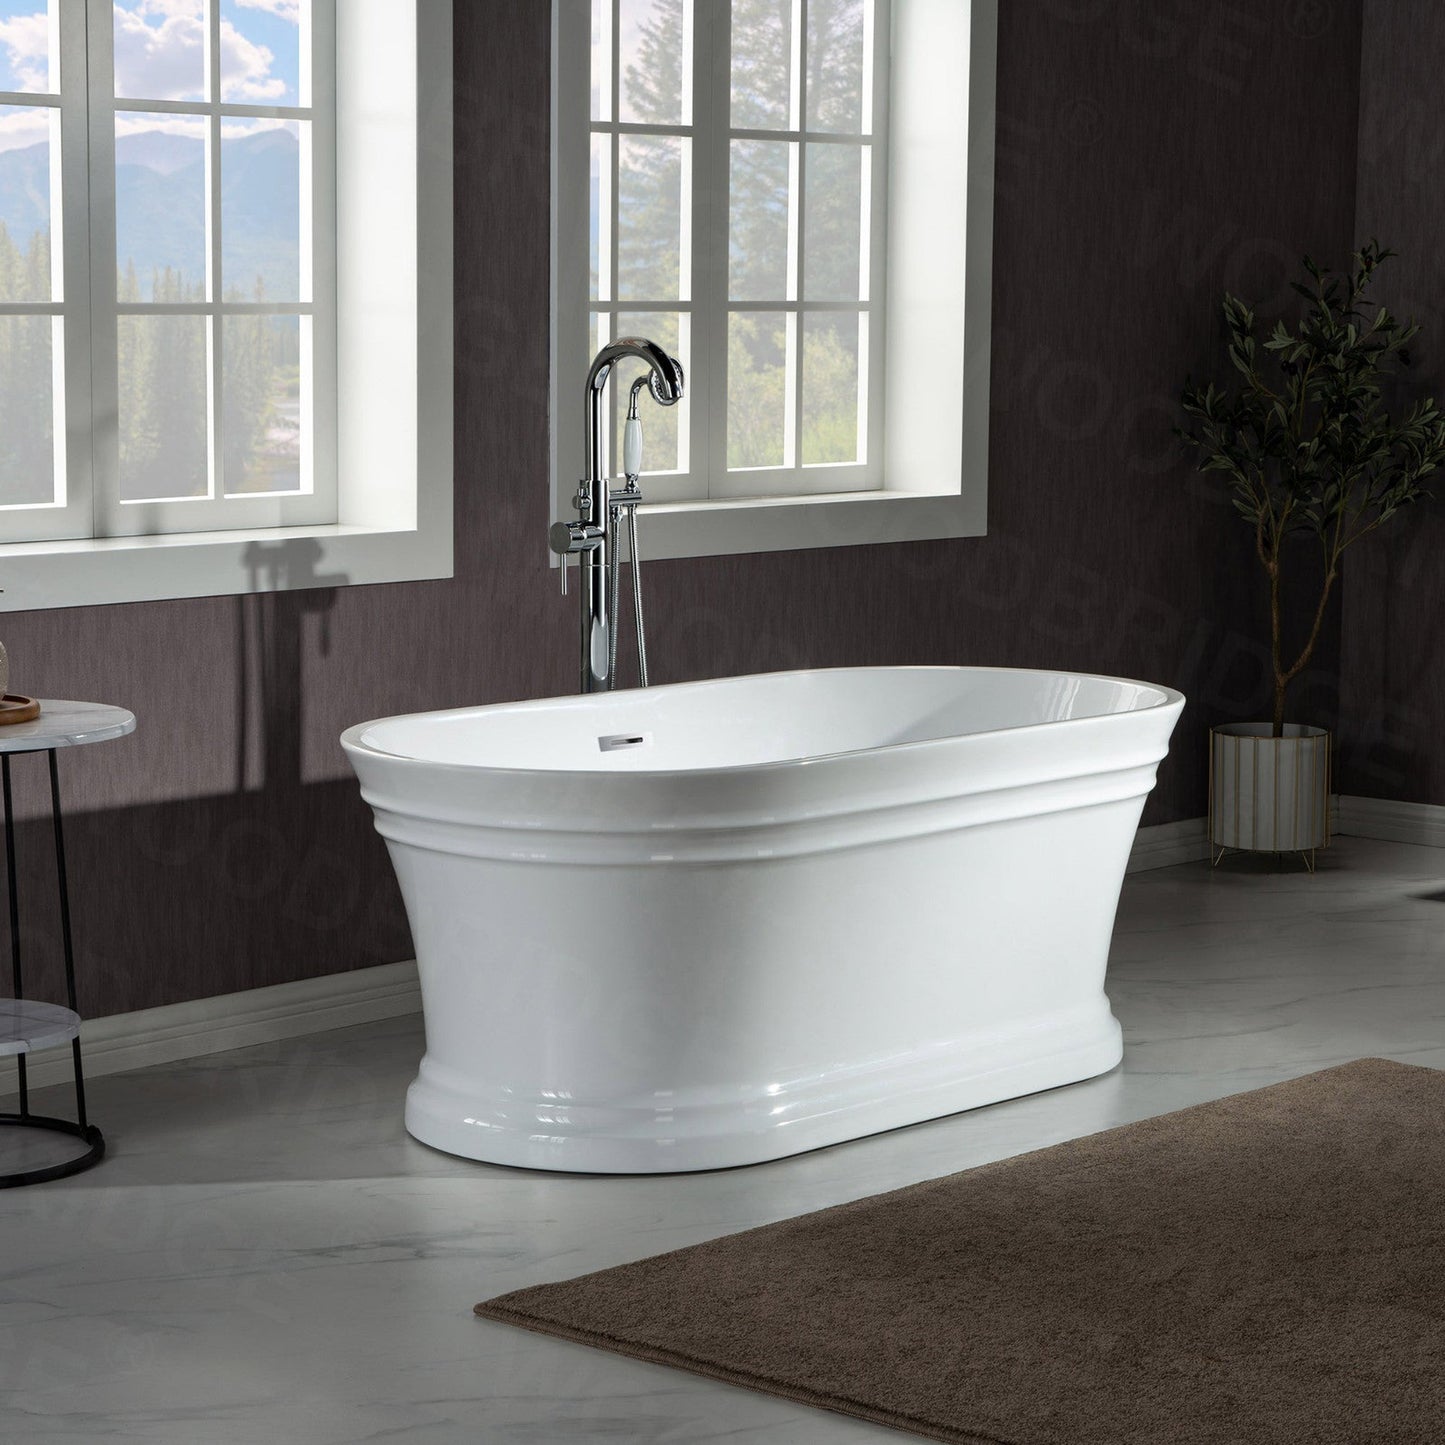 WoodBridge 67" Glossy White Lucite Acrylic Freestanding Double Ended Soaking Bathtub With Chrome Center Drain Assembly and Overflow